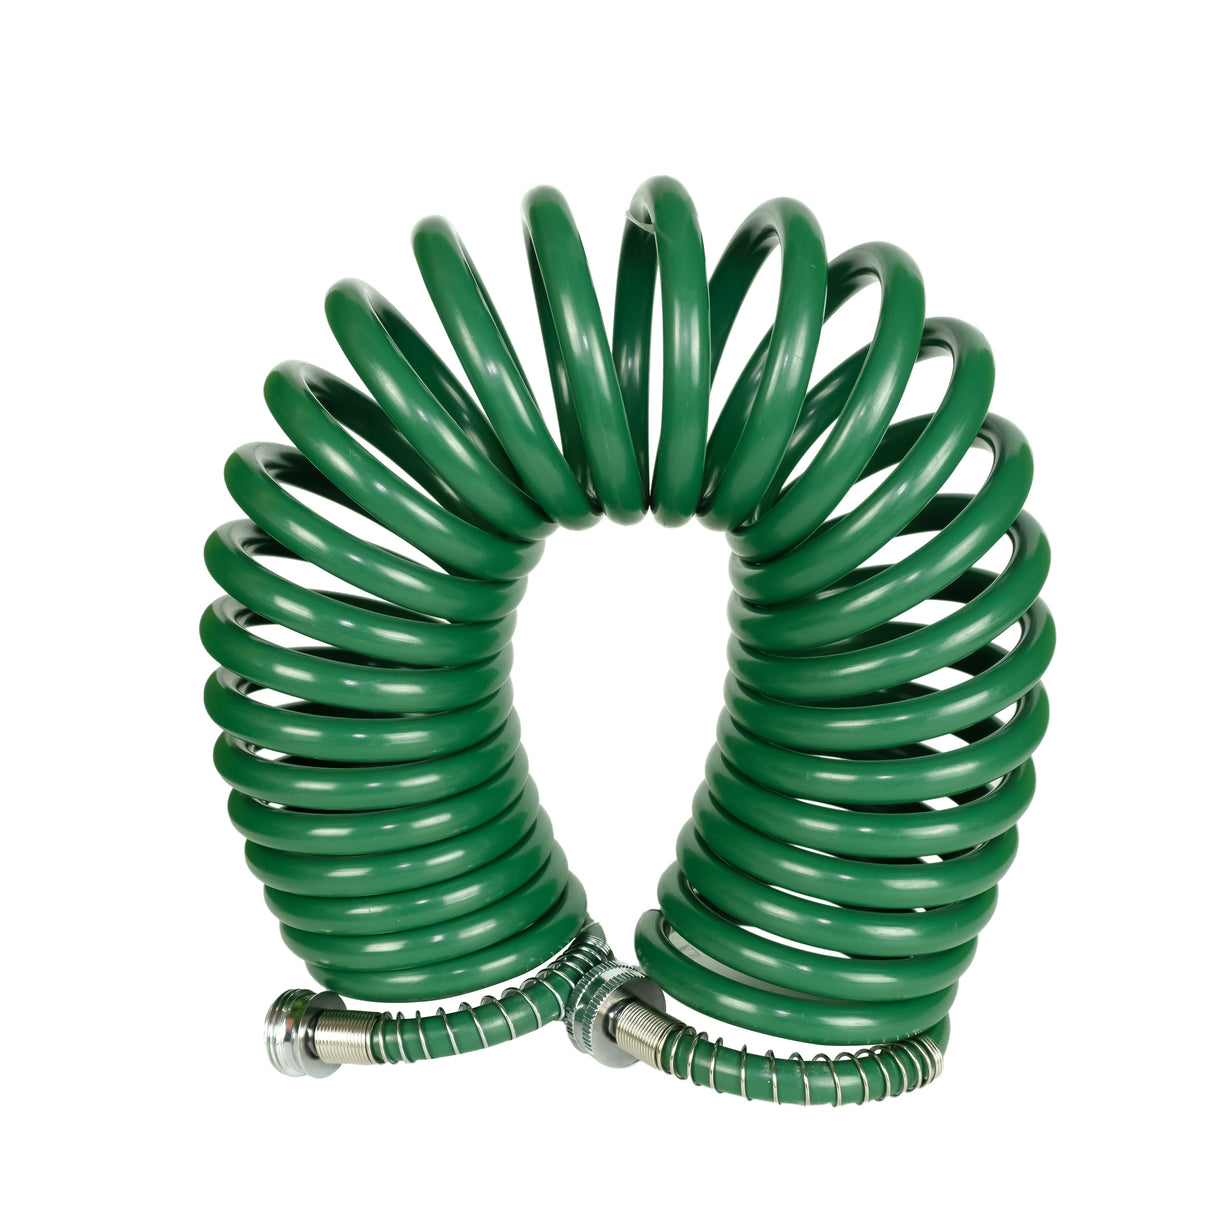 Avagard Recoil Water Hose 3/8" X 75'